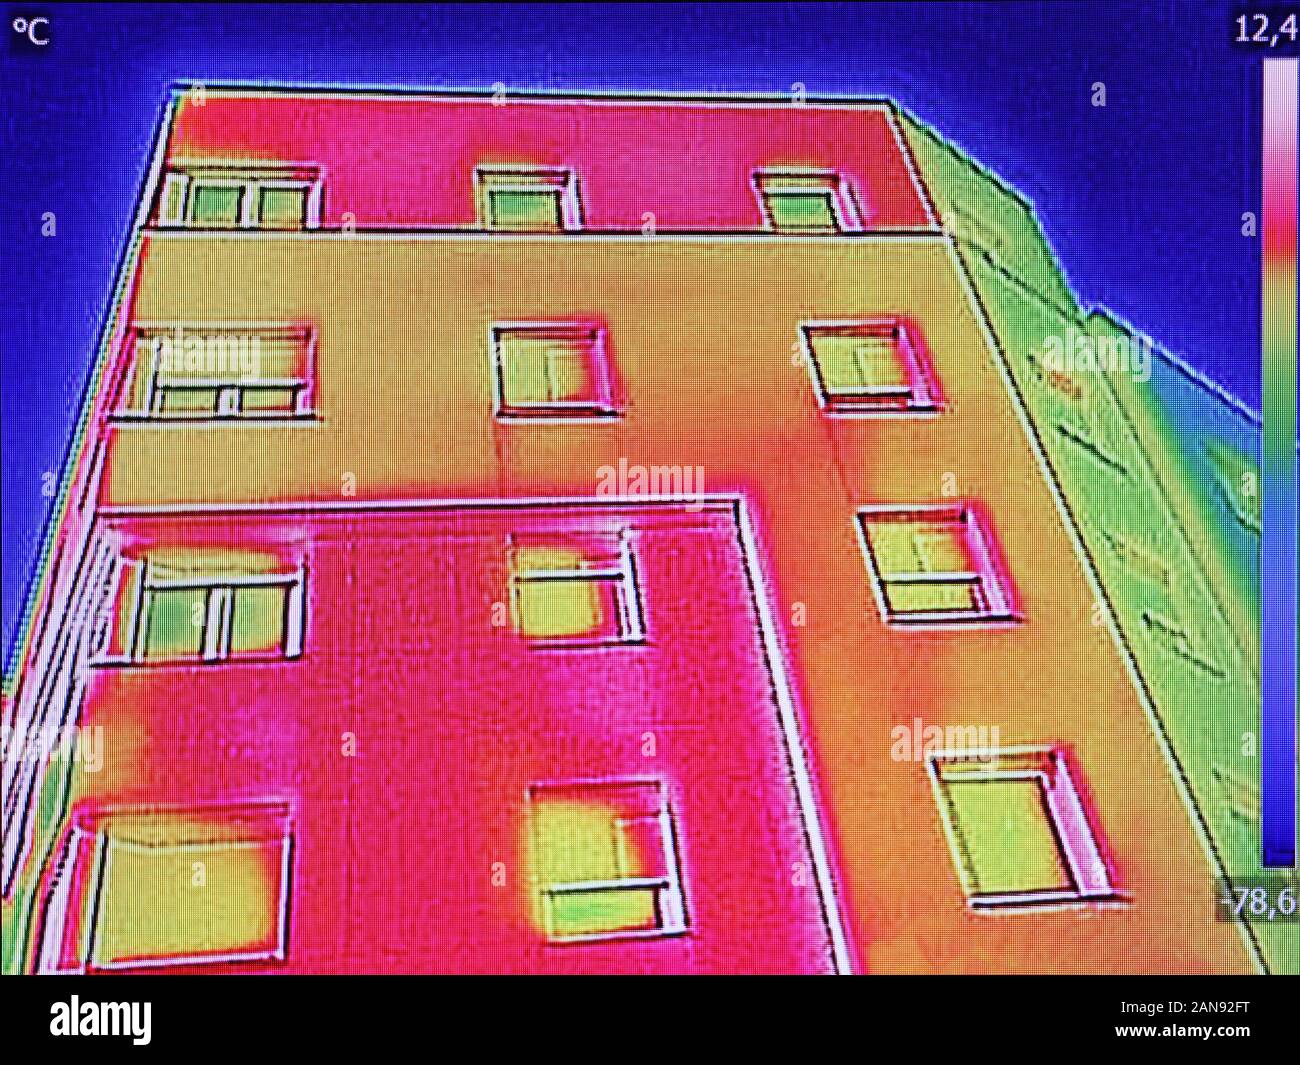 https://c8.alamy.com/comp/2AN92FT/thermal-image-heat-loss-at-the-residential-building-2AN92FT.jpg